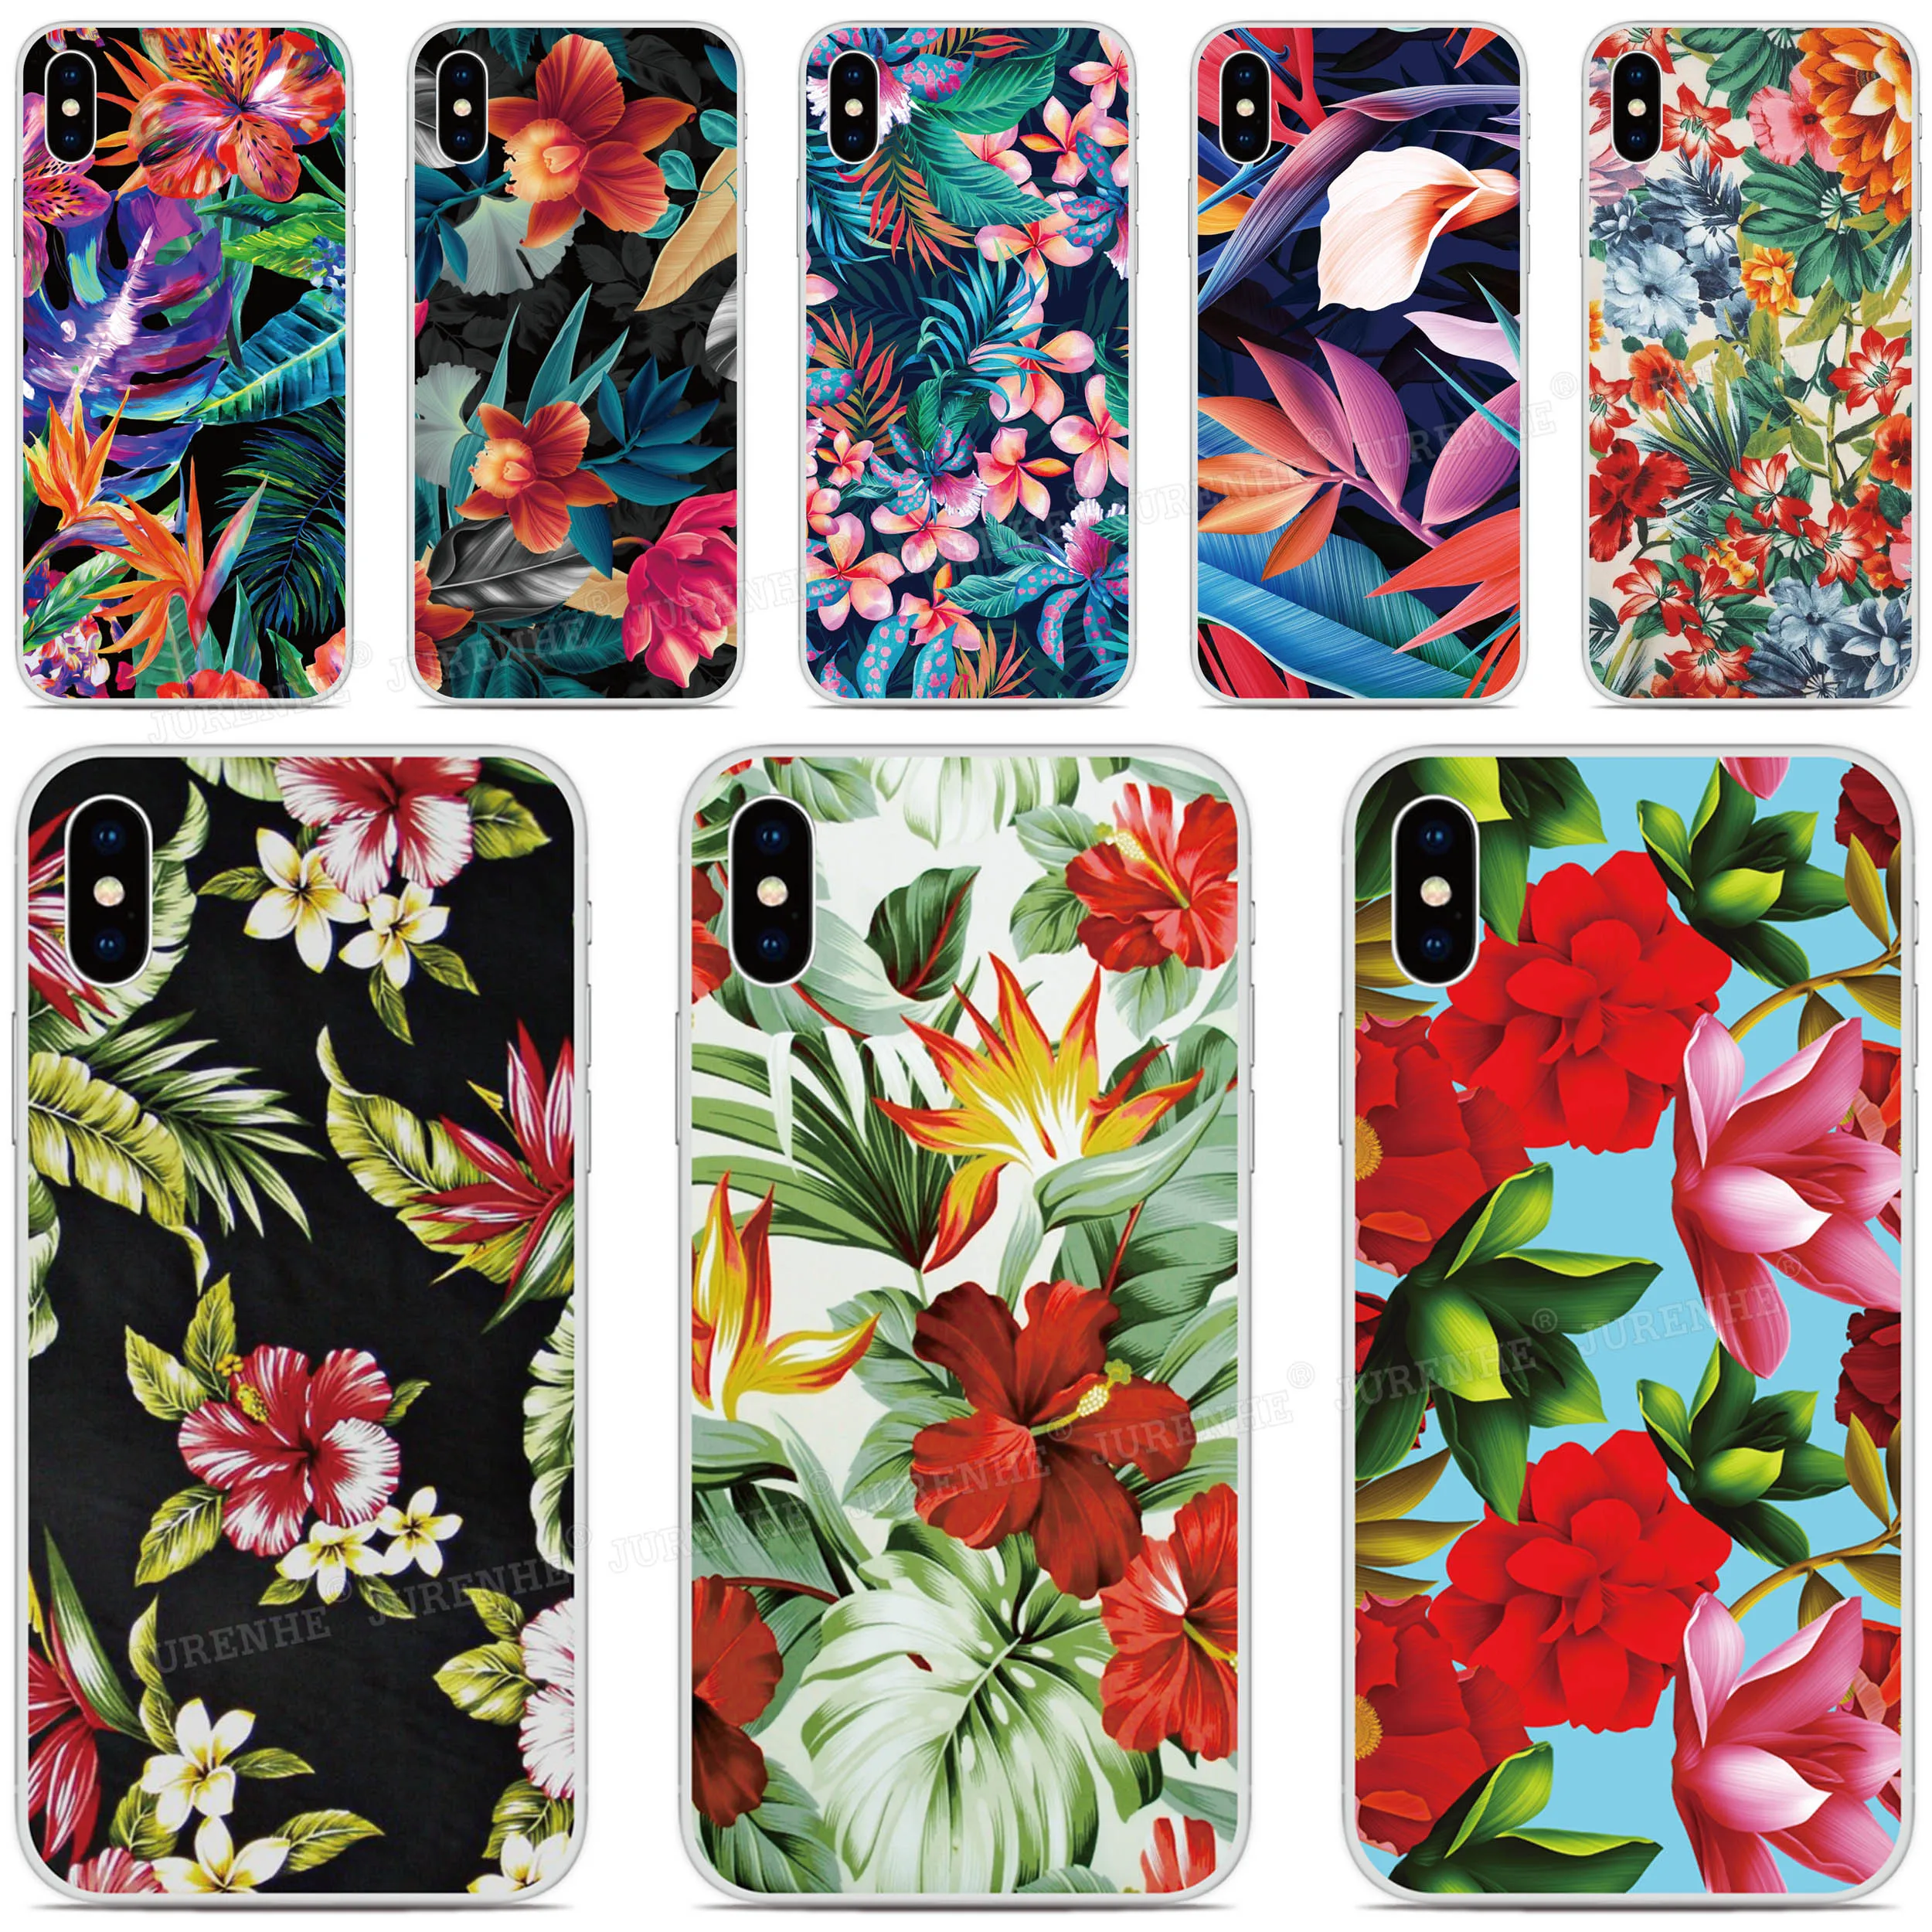 

Exotic Flower Floral Phone Case For UMIDIGI Bison GT A7S A3X A3S A3 A5 S3 A7 S5 A9 Pro F2 F1 Play Power 3 X One TPU Soft Cover